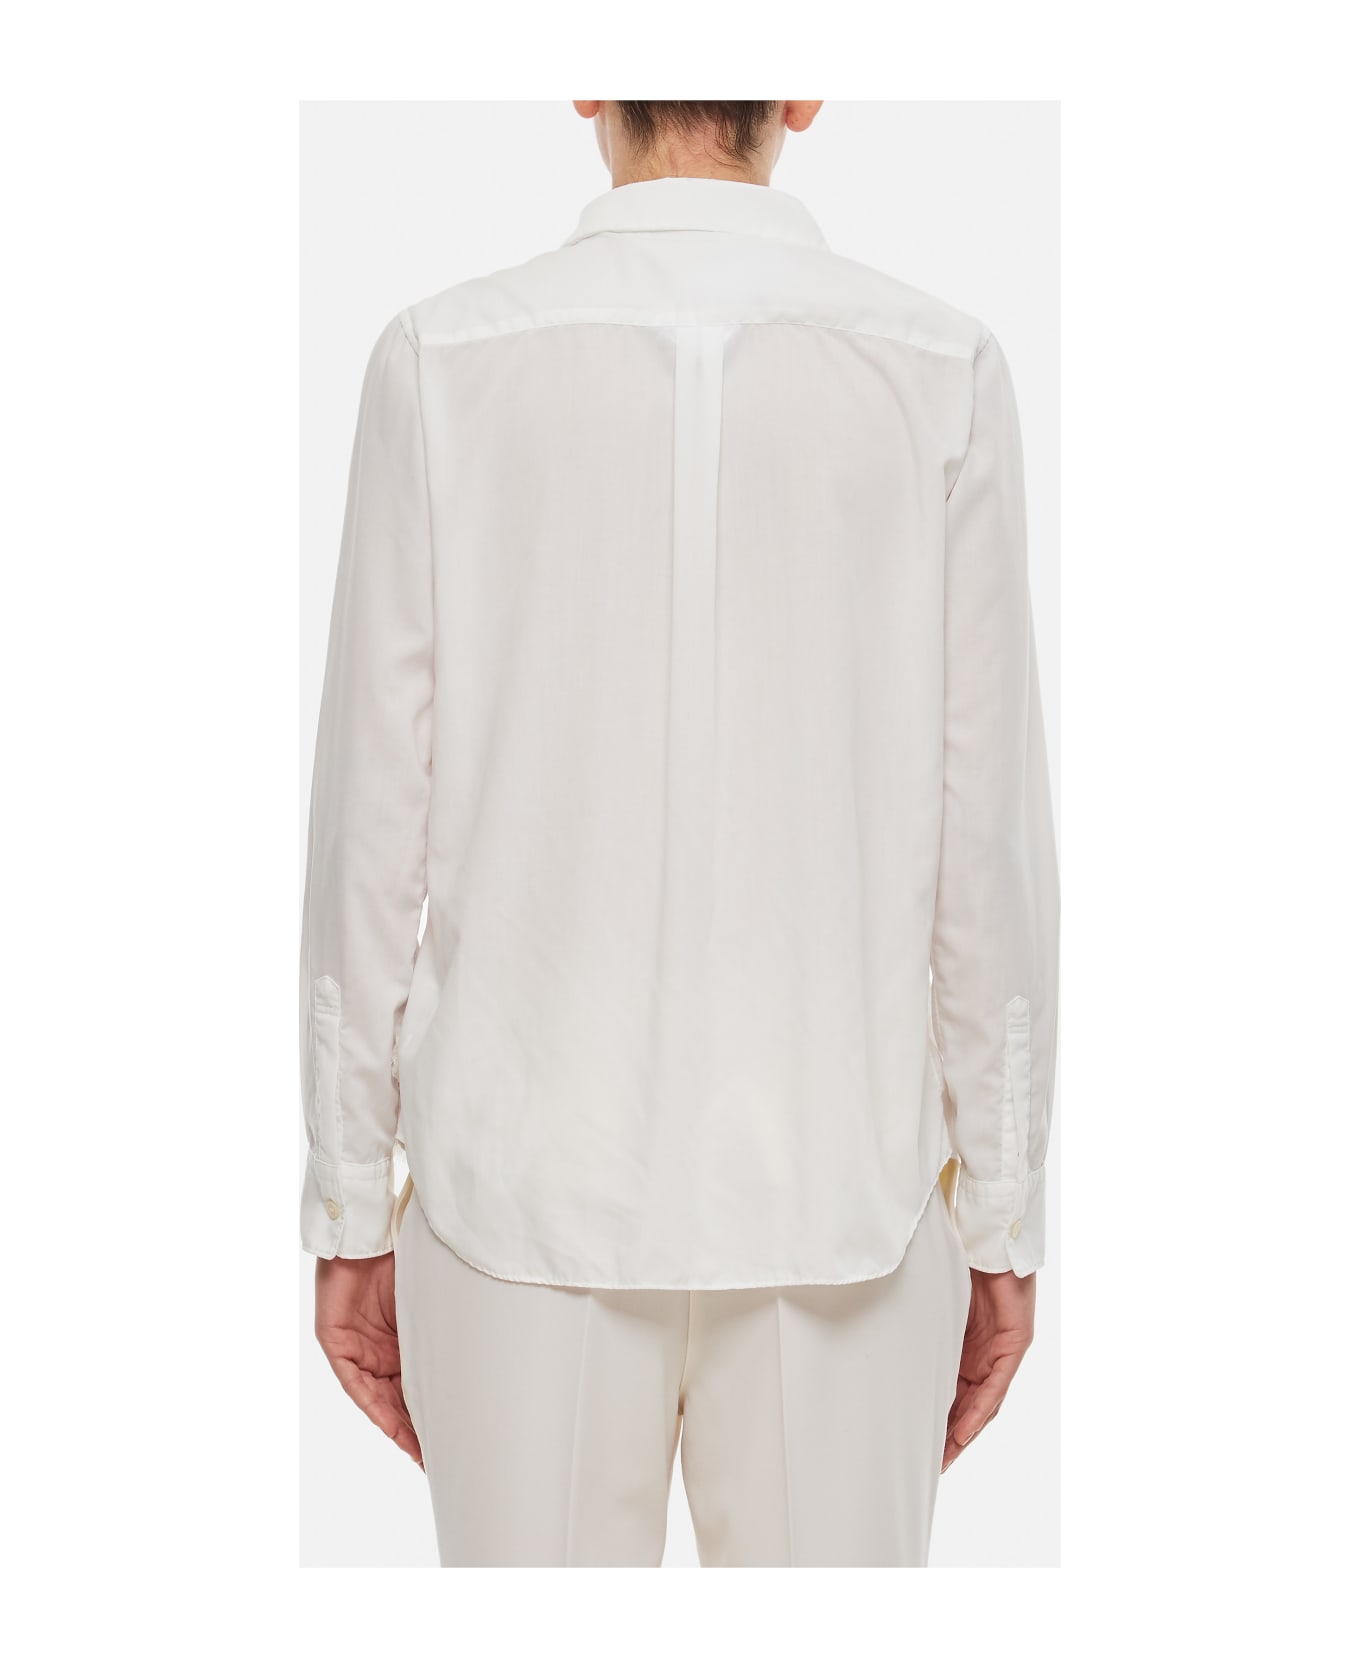 Comme des Garçons Rouched Long Sleeve Shirt - White ブラウス